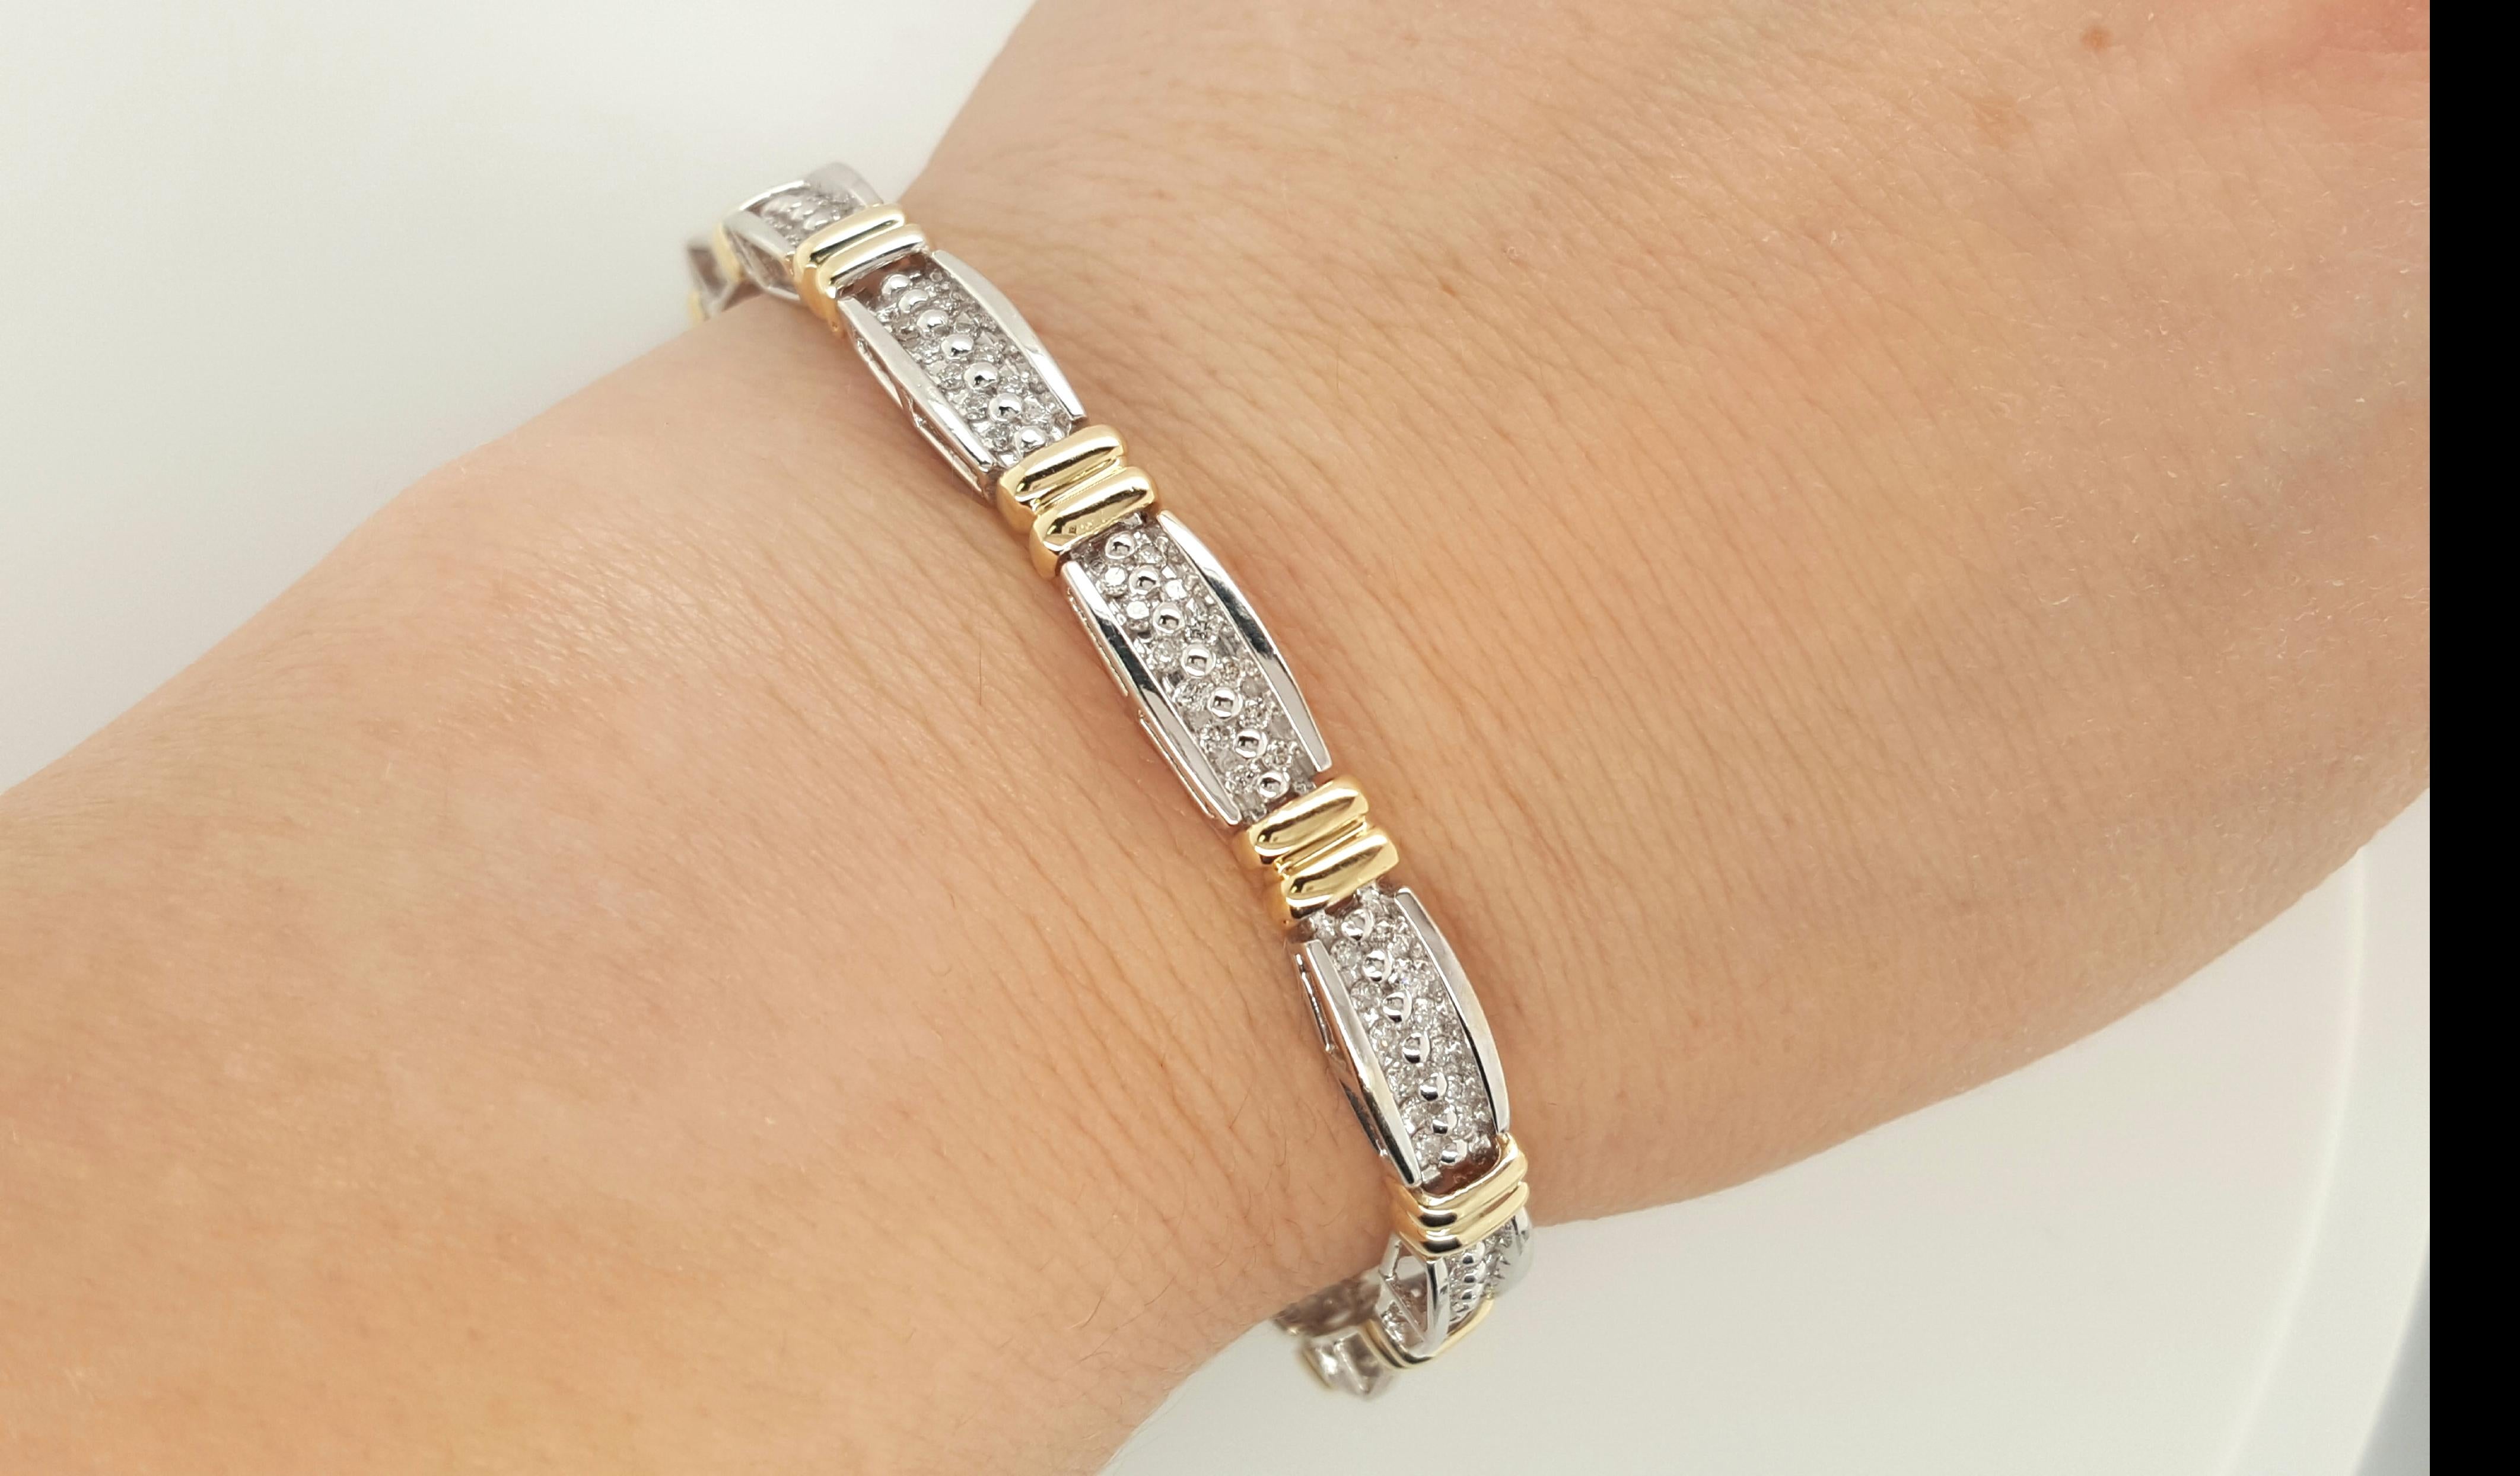 This incredible tennis bracelet is an absolute beauty. The bracelet is made of 14 karat yellow and white gold and sits on the the arm perfectly with flexibility. This bracelet is stunning arm candy that can be enjoyed and admired for any occasion.